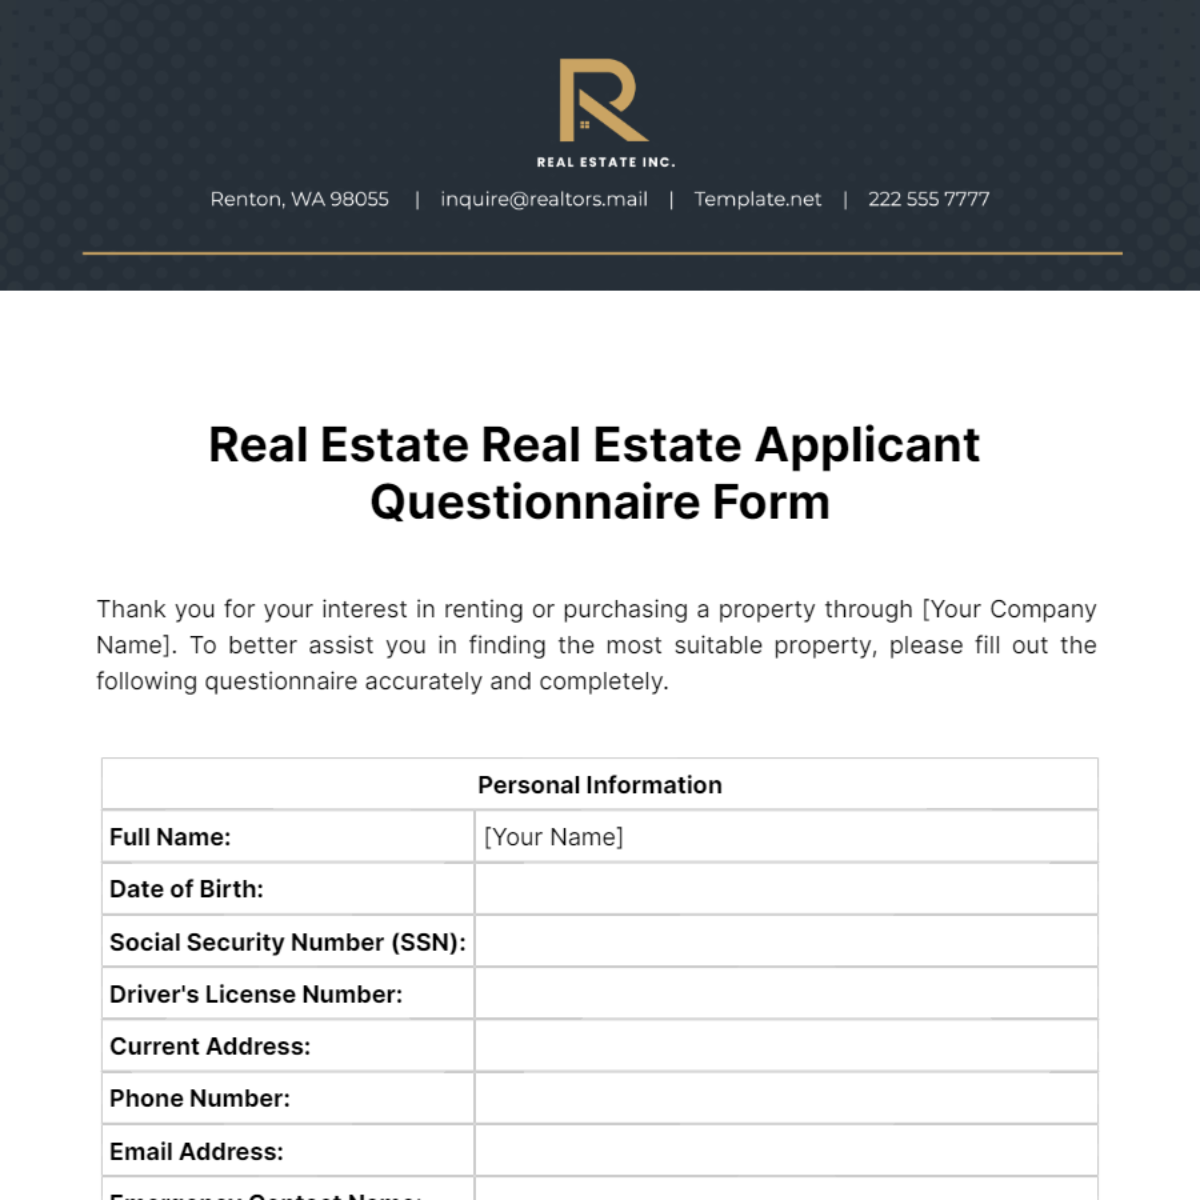 Real Estate Real Estate Applicant Questionnaire Form Template